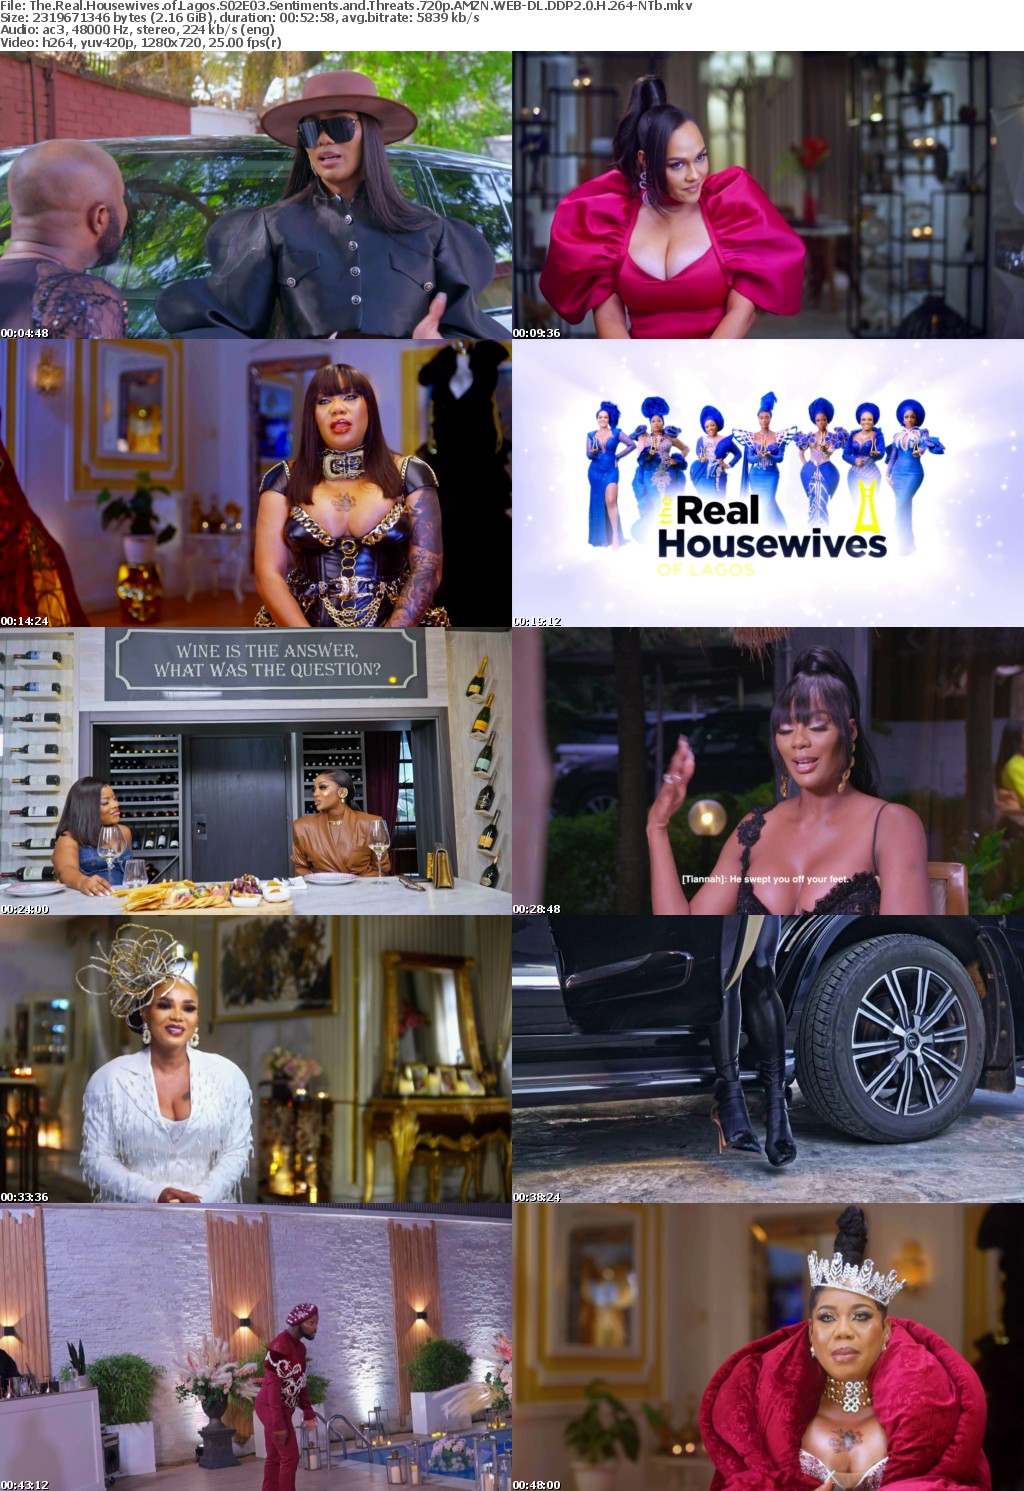 The Real Housewives of Lagos S02E03 Sentiments and Threats 720p AMZN WEB-DL DDP2 0 H 264-NTb